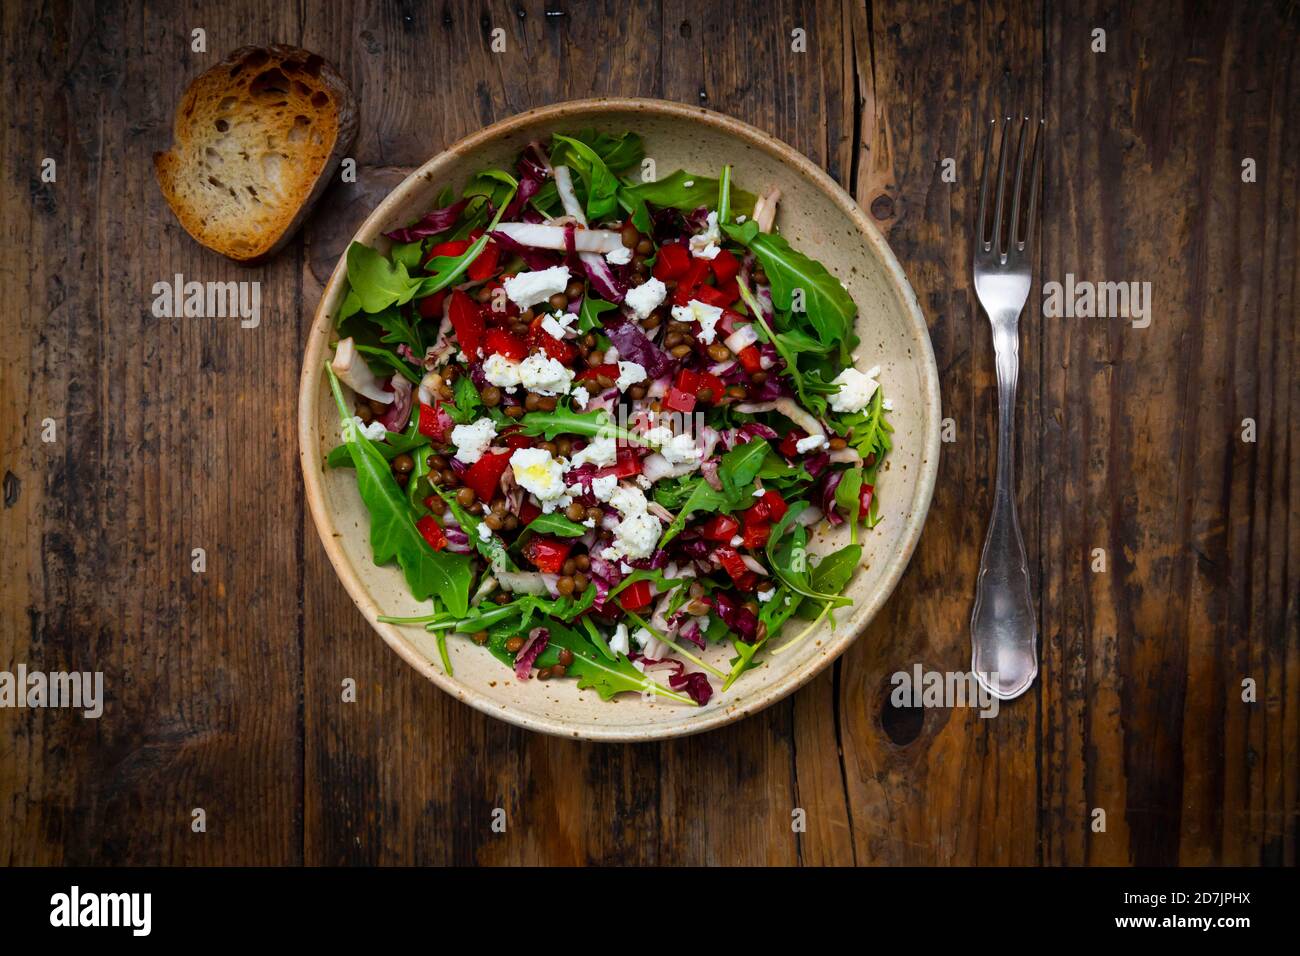 Bowl of vegetable salad with lentils, arugula, red bell pepper, feta cheese and radicchio Stock Photo